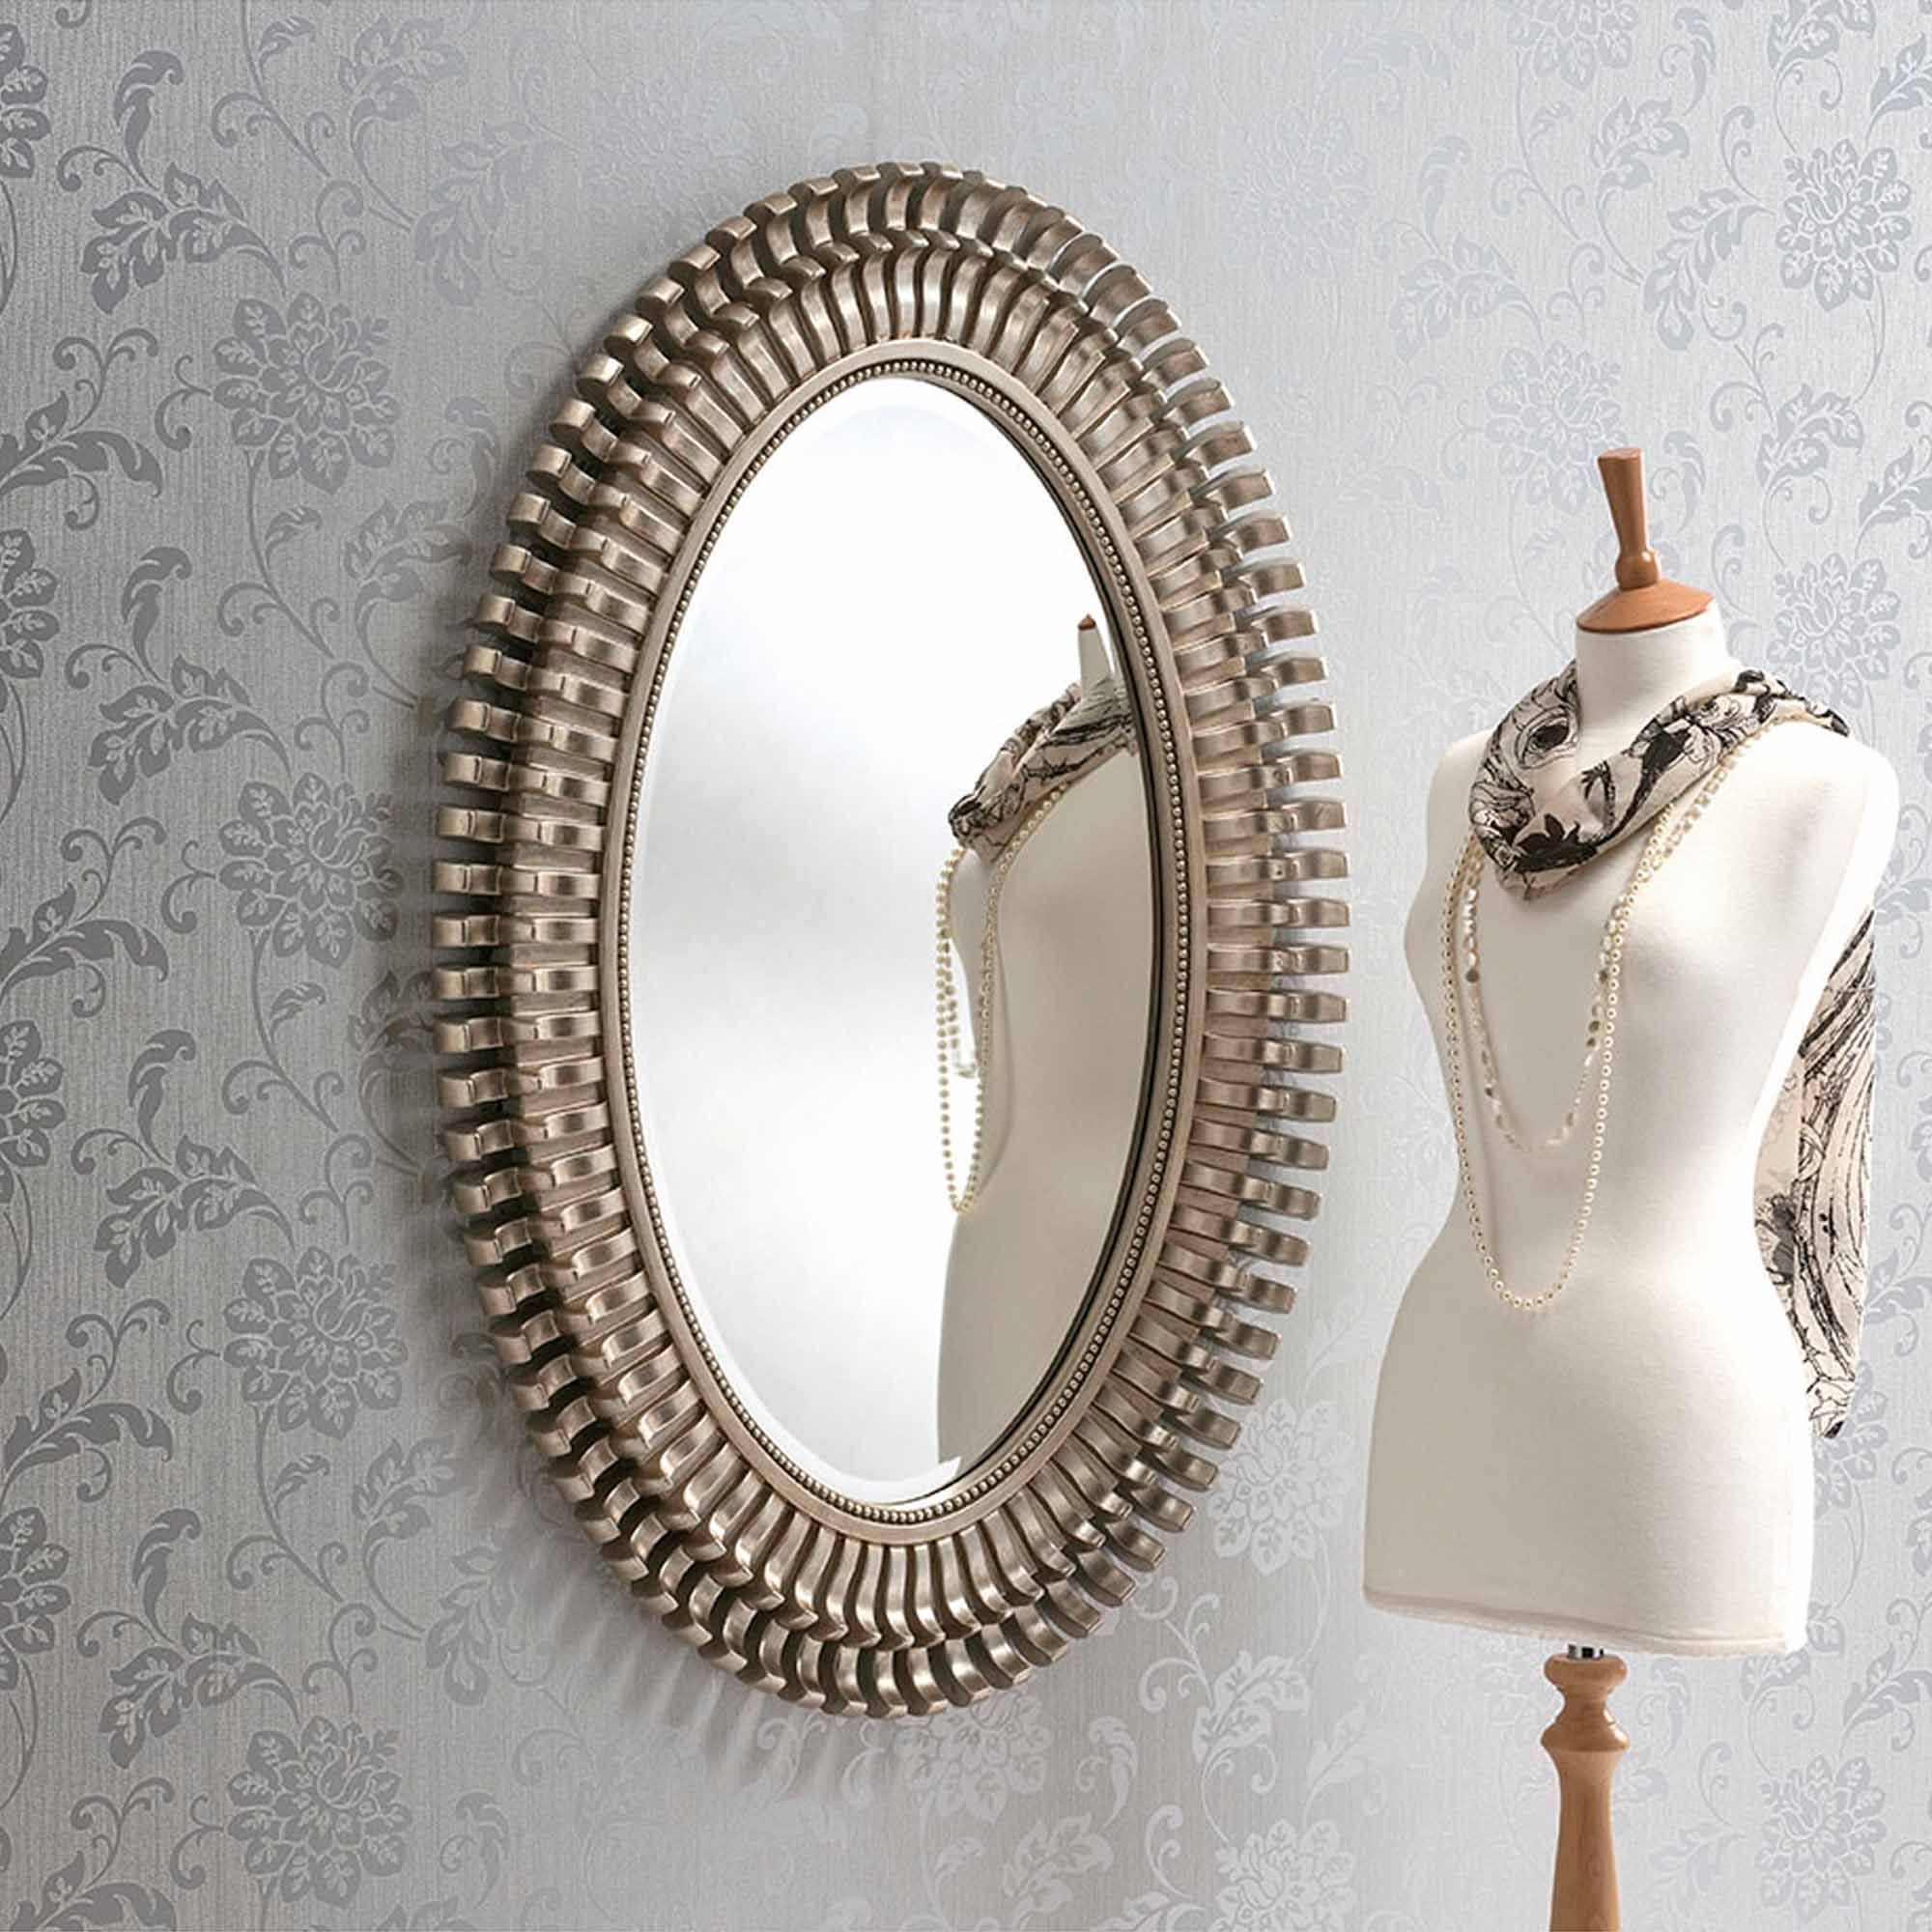 Silver Decorative Mirror Intended For Silver Decorative Wall Mirrors (View 11 of 15)